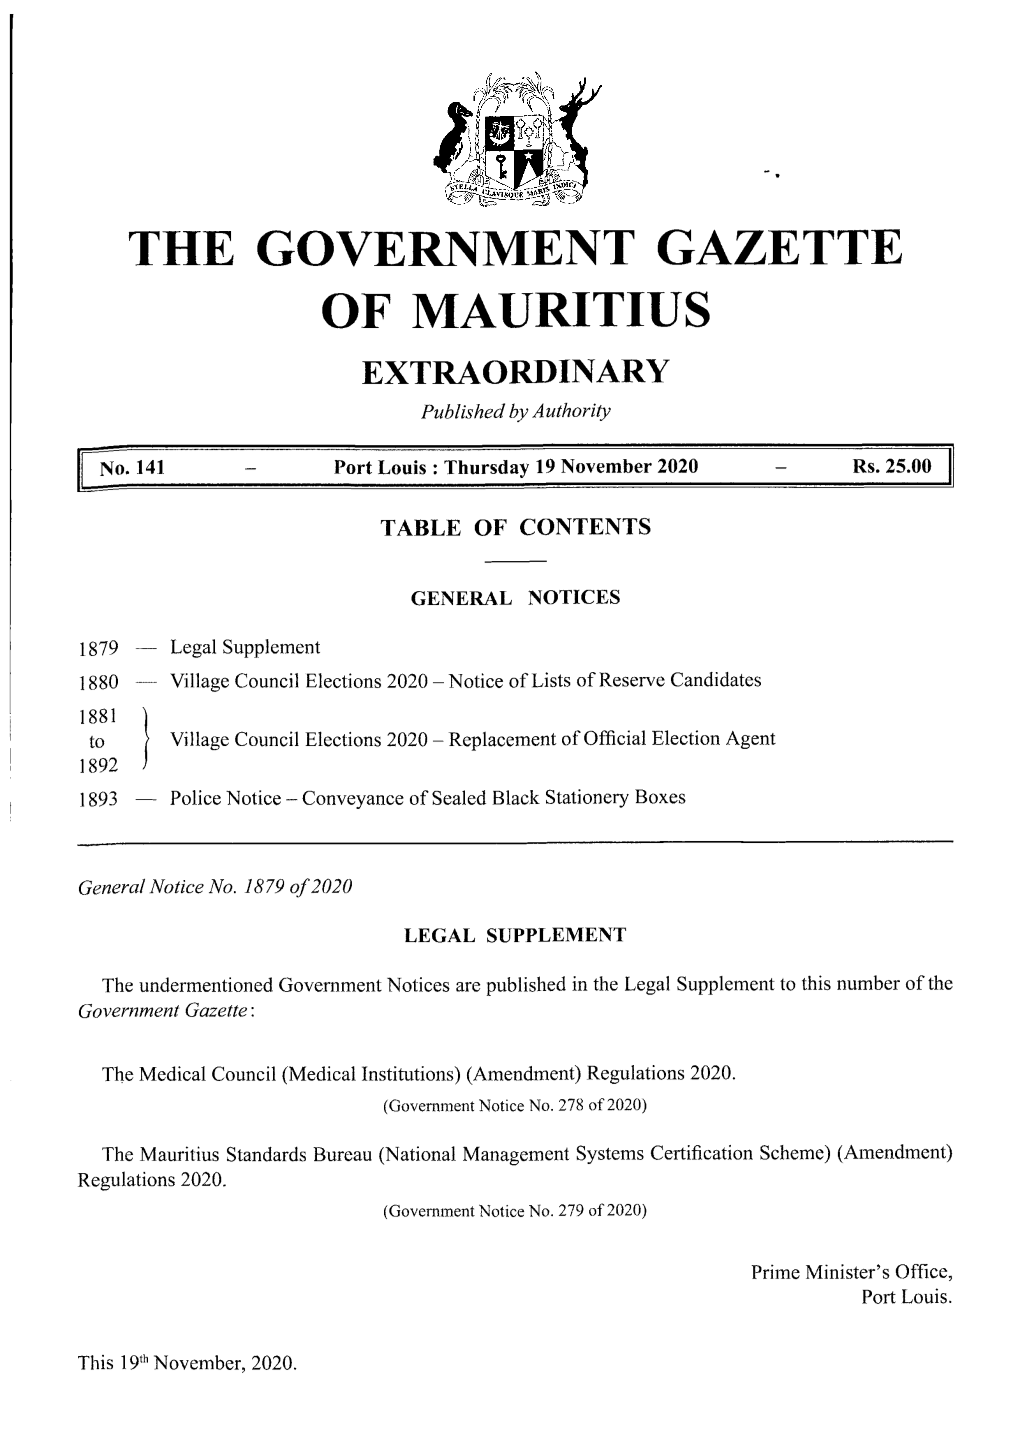 THE GOVERNMENT GAZETTE of MAURITIUS EXTRAORDINARY Published by Authority